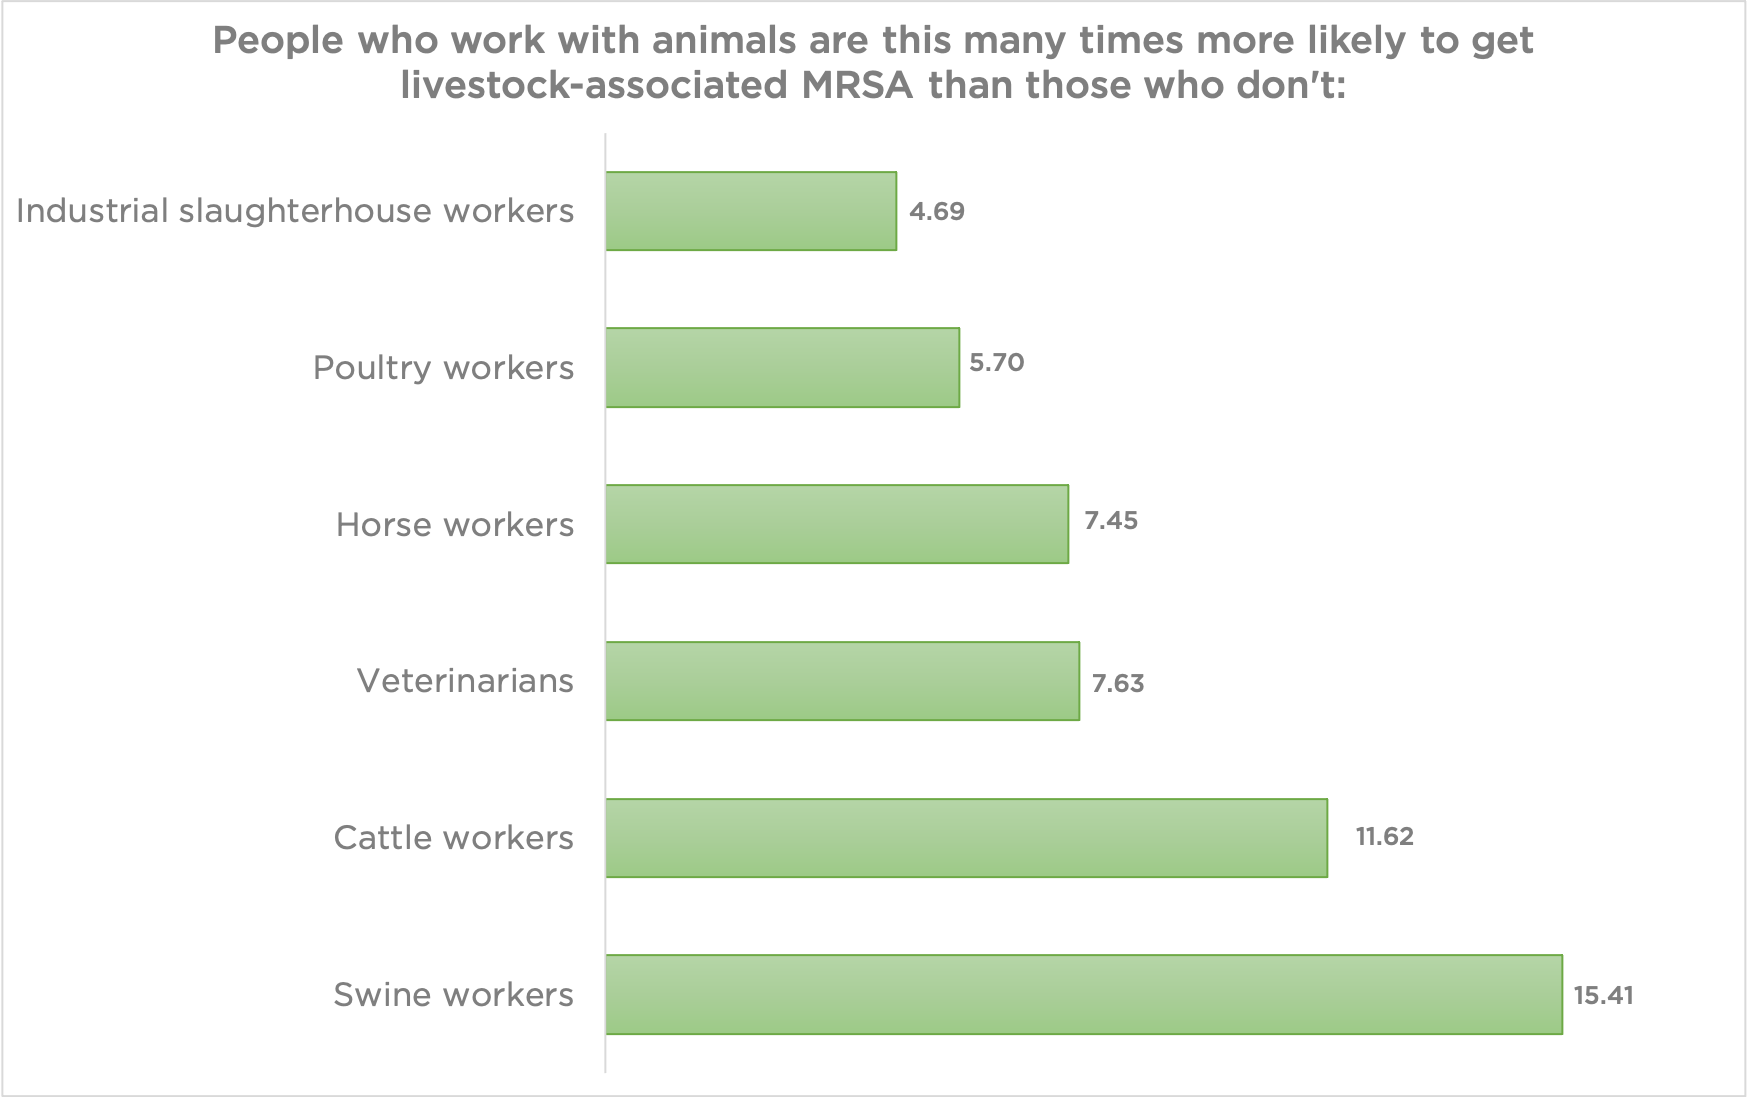 A bar graph shows the relative risk for livestock workers relative to those who don't work with animals. The risk is 4.69 times higher for industrial slaughterhouse workers; 5.70 for poultry workers; 7.45 for horse workers; 7.65 for veterinarians; 11.62 for cattle workers and 15.41 for swine workers.